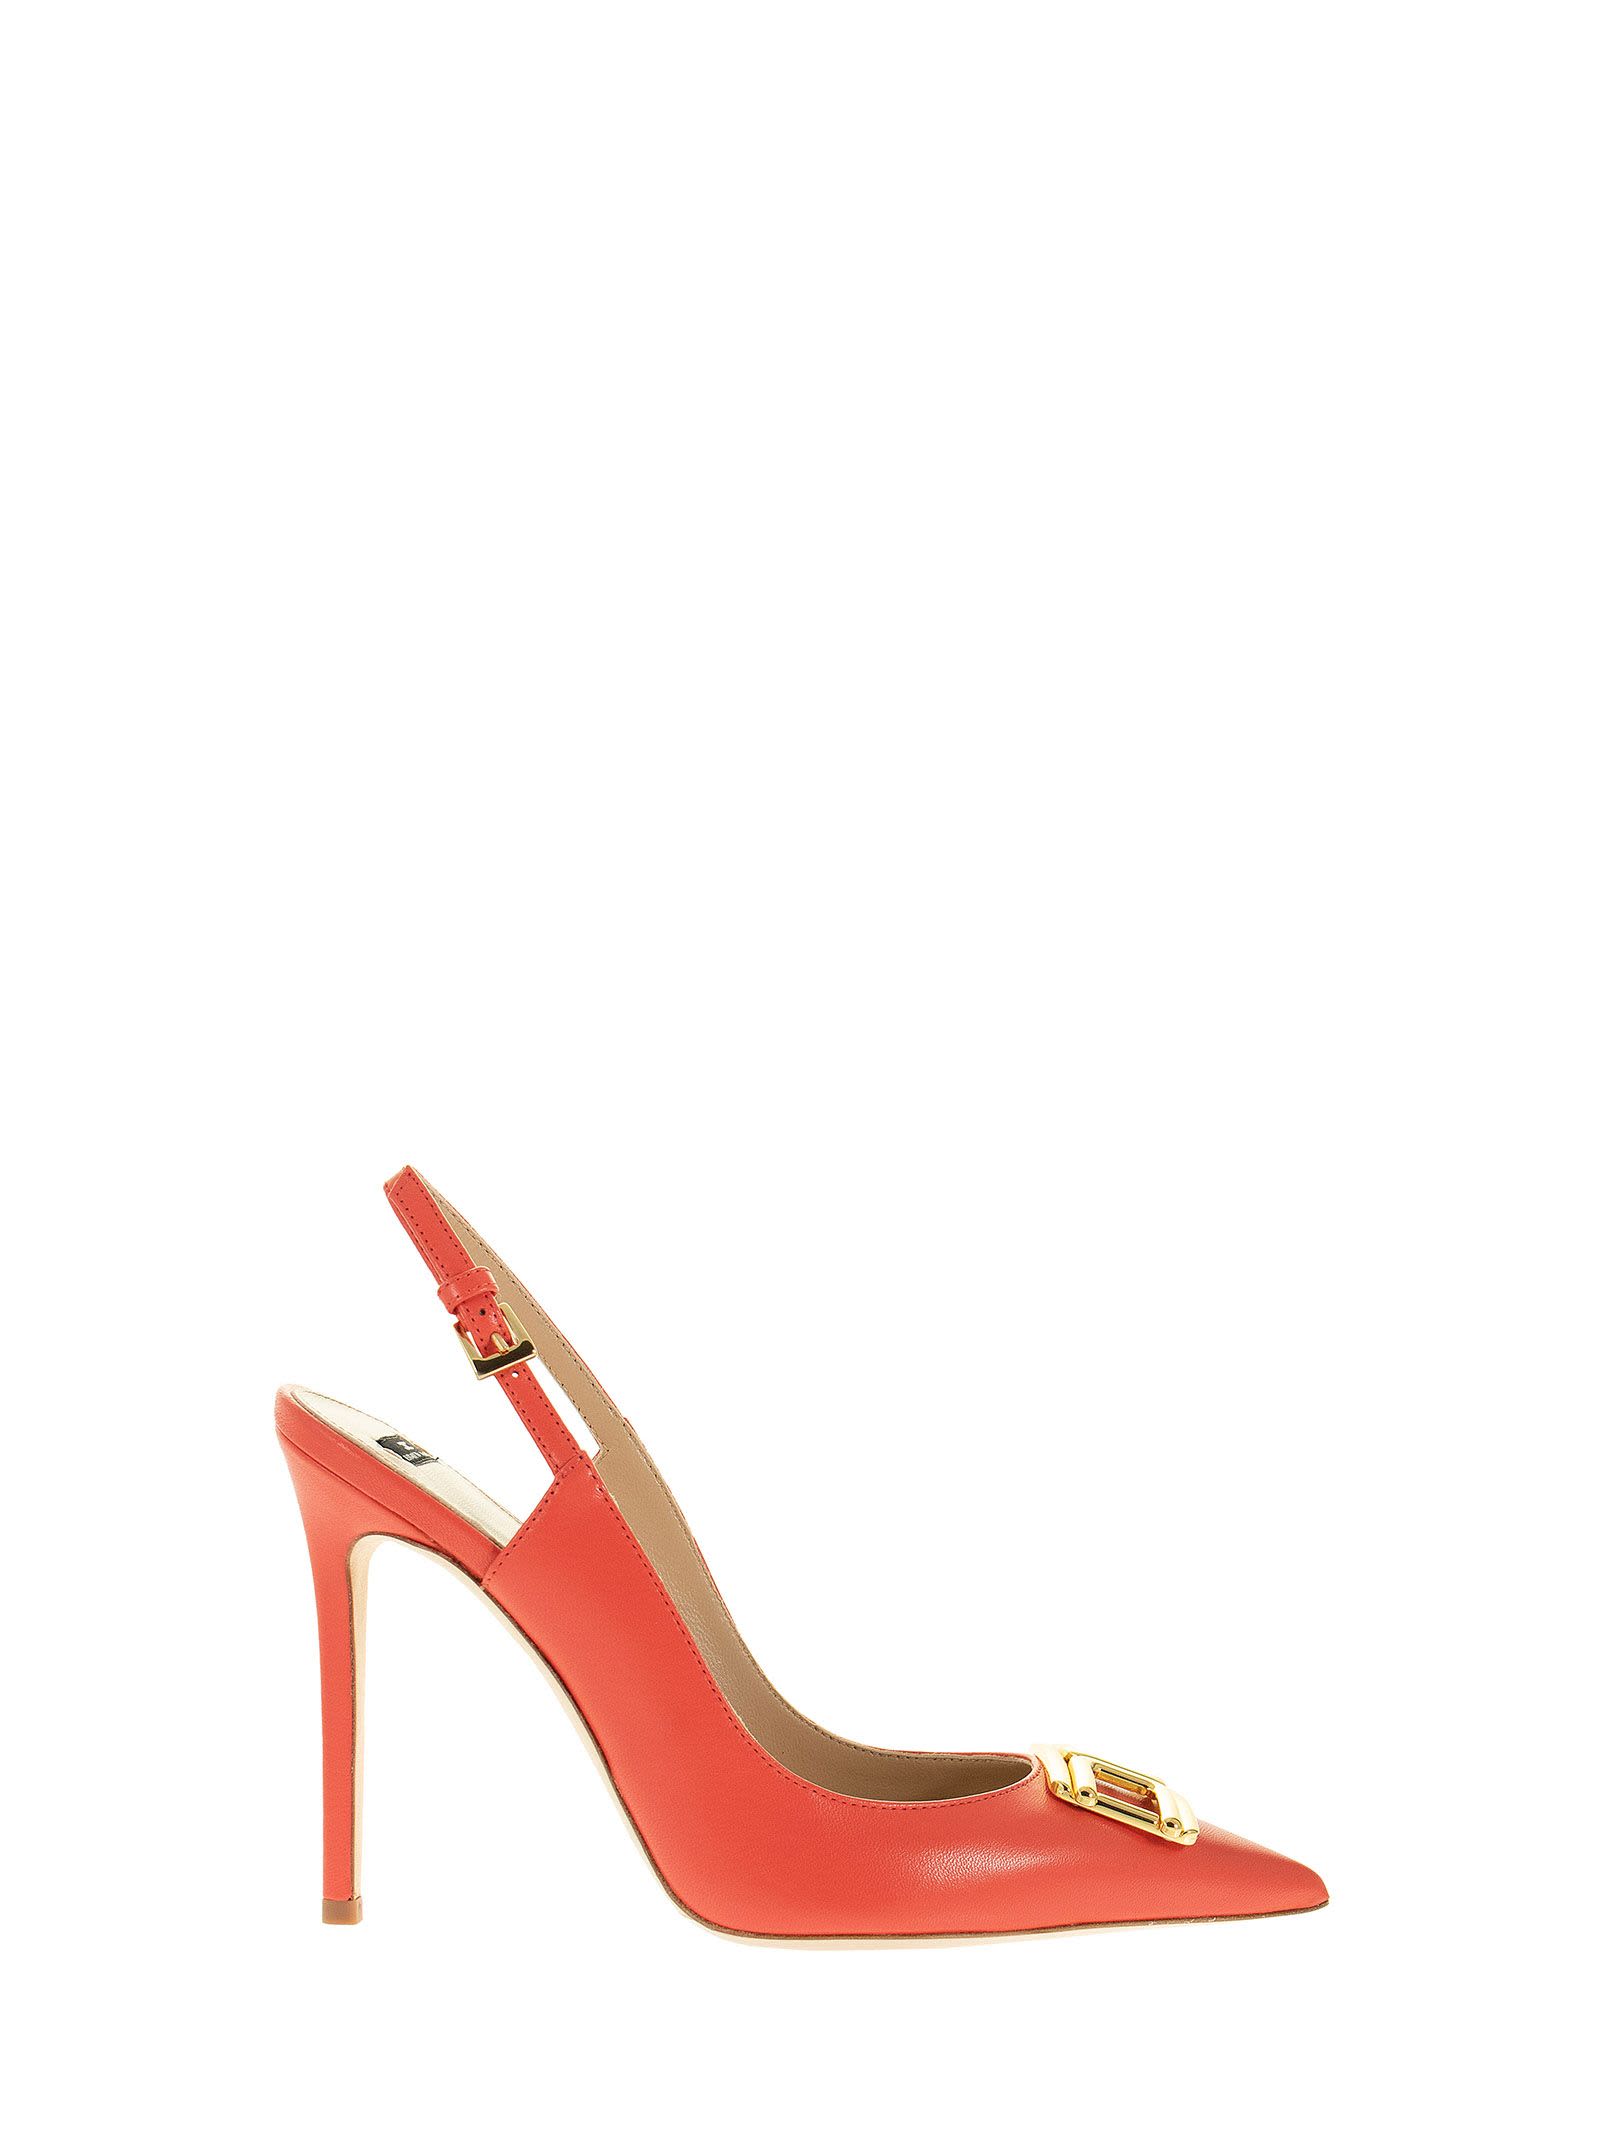 Elisabetta Franchi Sandal With Heel And Closed Toe